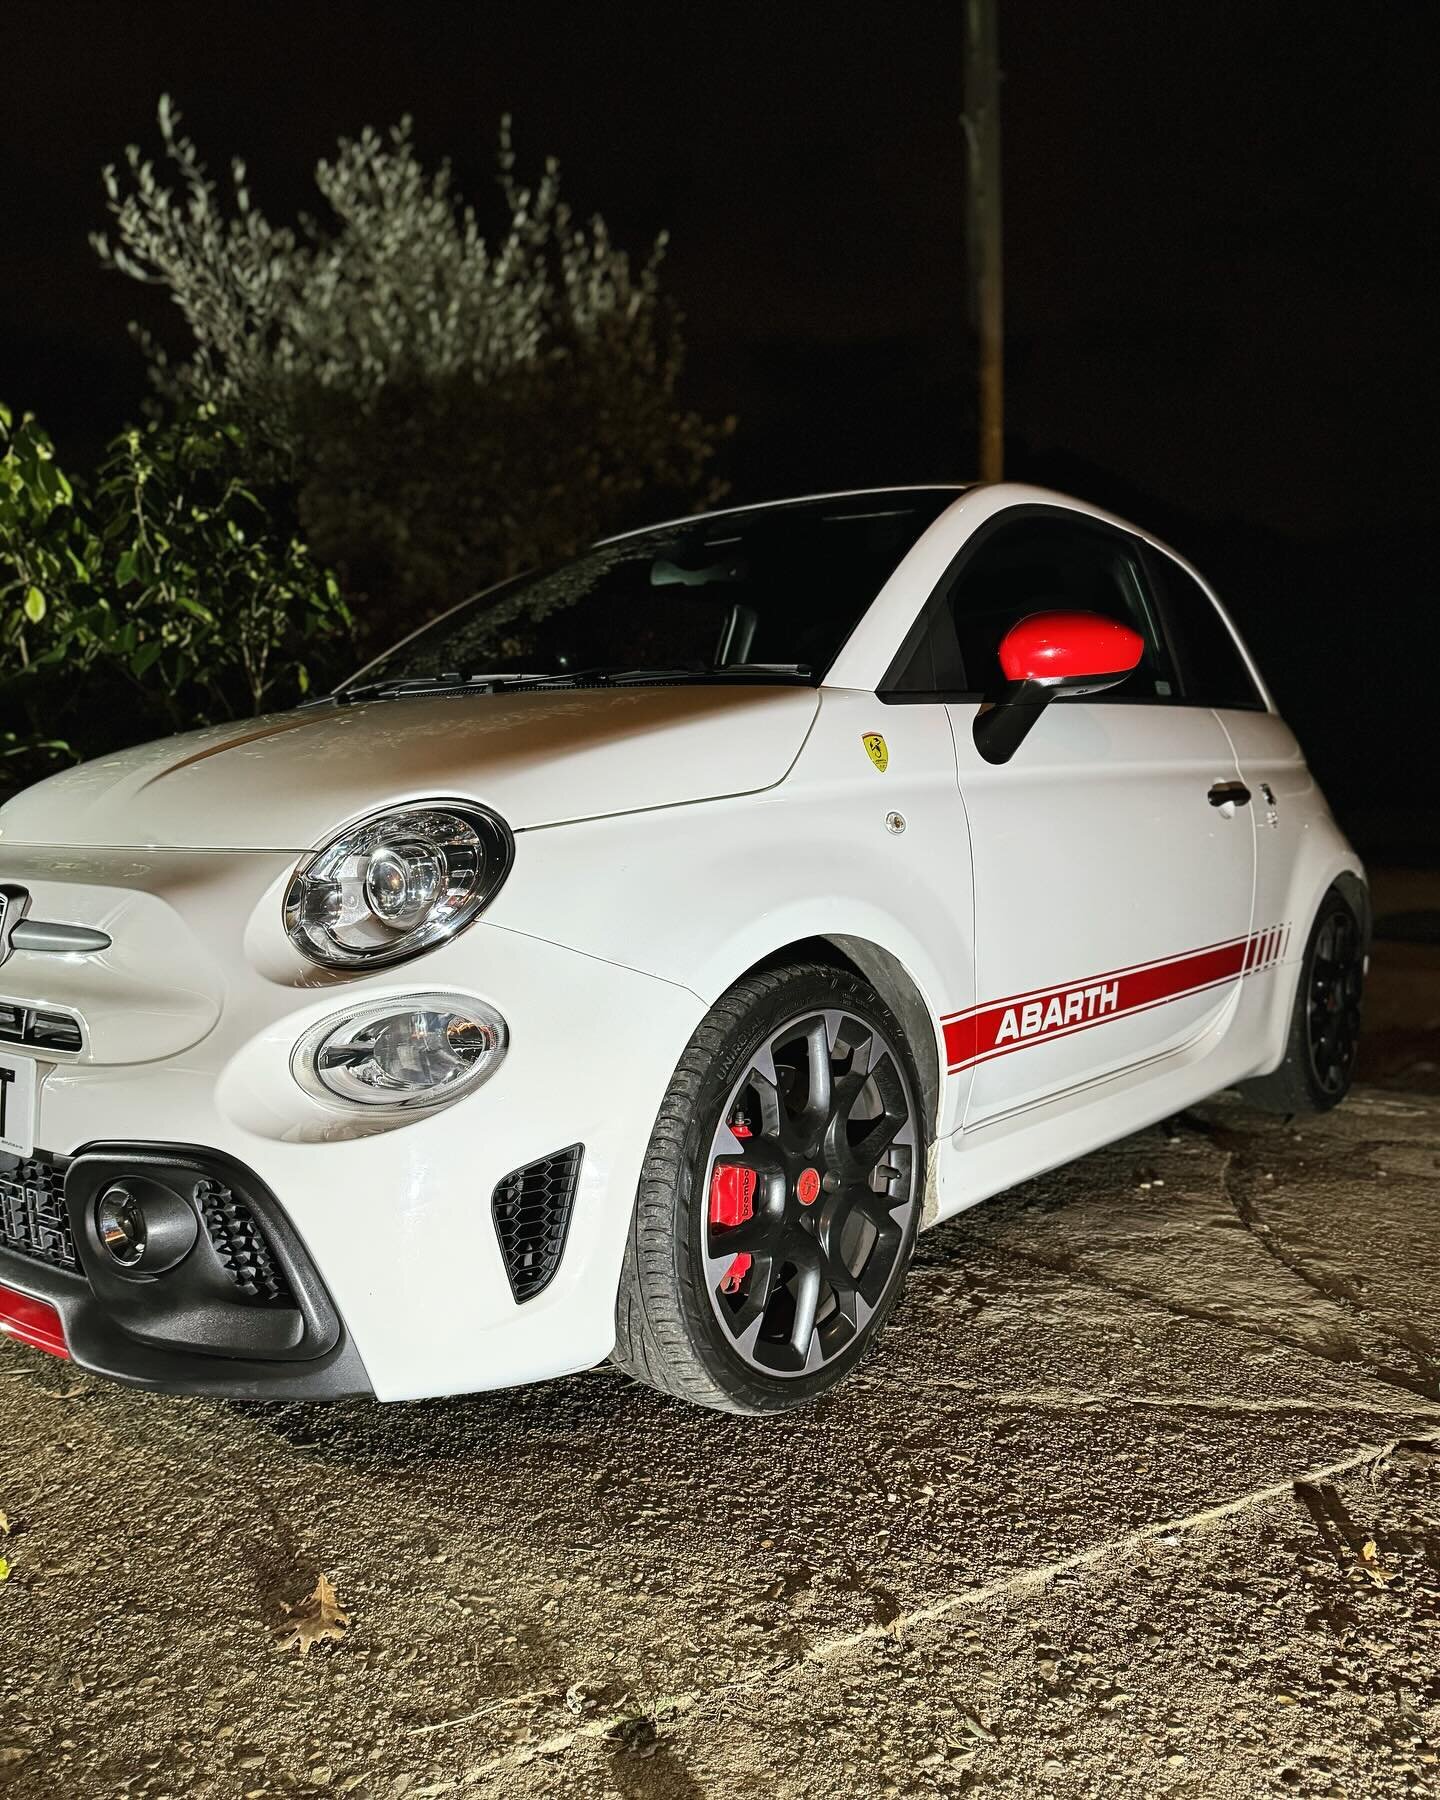 FIAT 500 Abarth 595 Competizione

Stage 1 Performance Remap

📈 180 bhp ➡️ 200 bhp 📈
📈 250 nm ➡️ 300 nm 📈
__________________________________________
💻 Custom Software
📈 Performance
🌿 Economy
💥 Pops &amp; Bangs / Hardcut
⚙ Gearbox Tuning
🚘 Mob